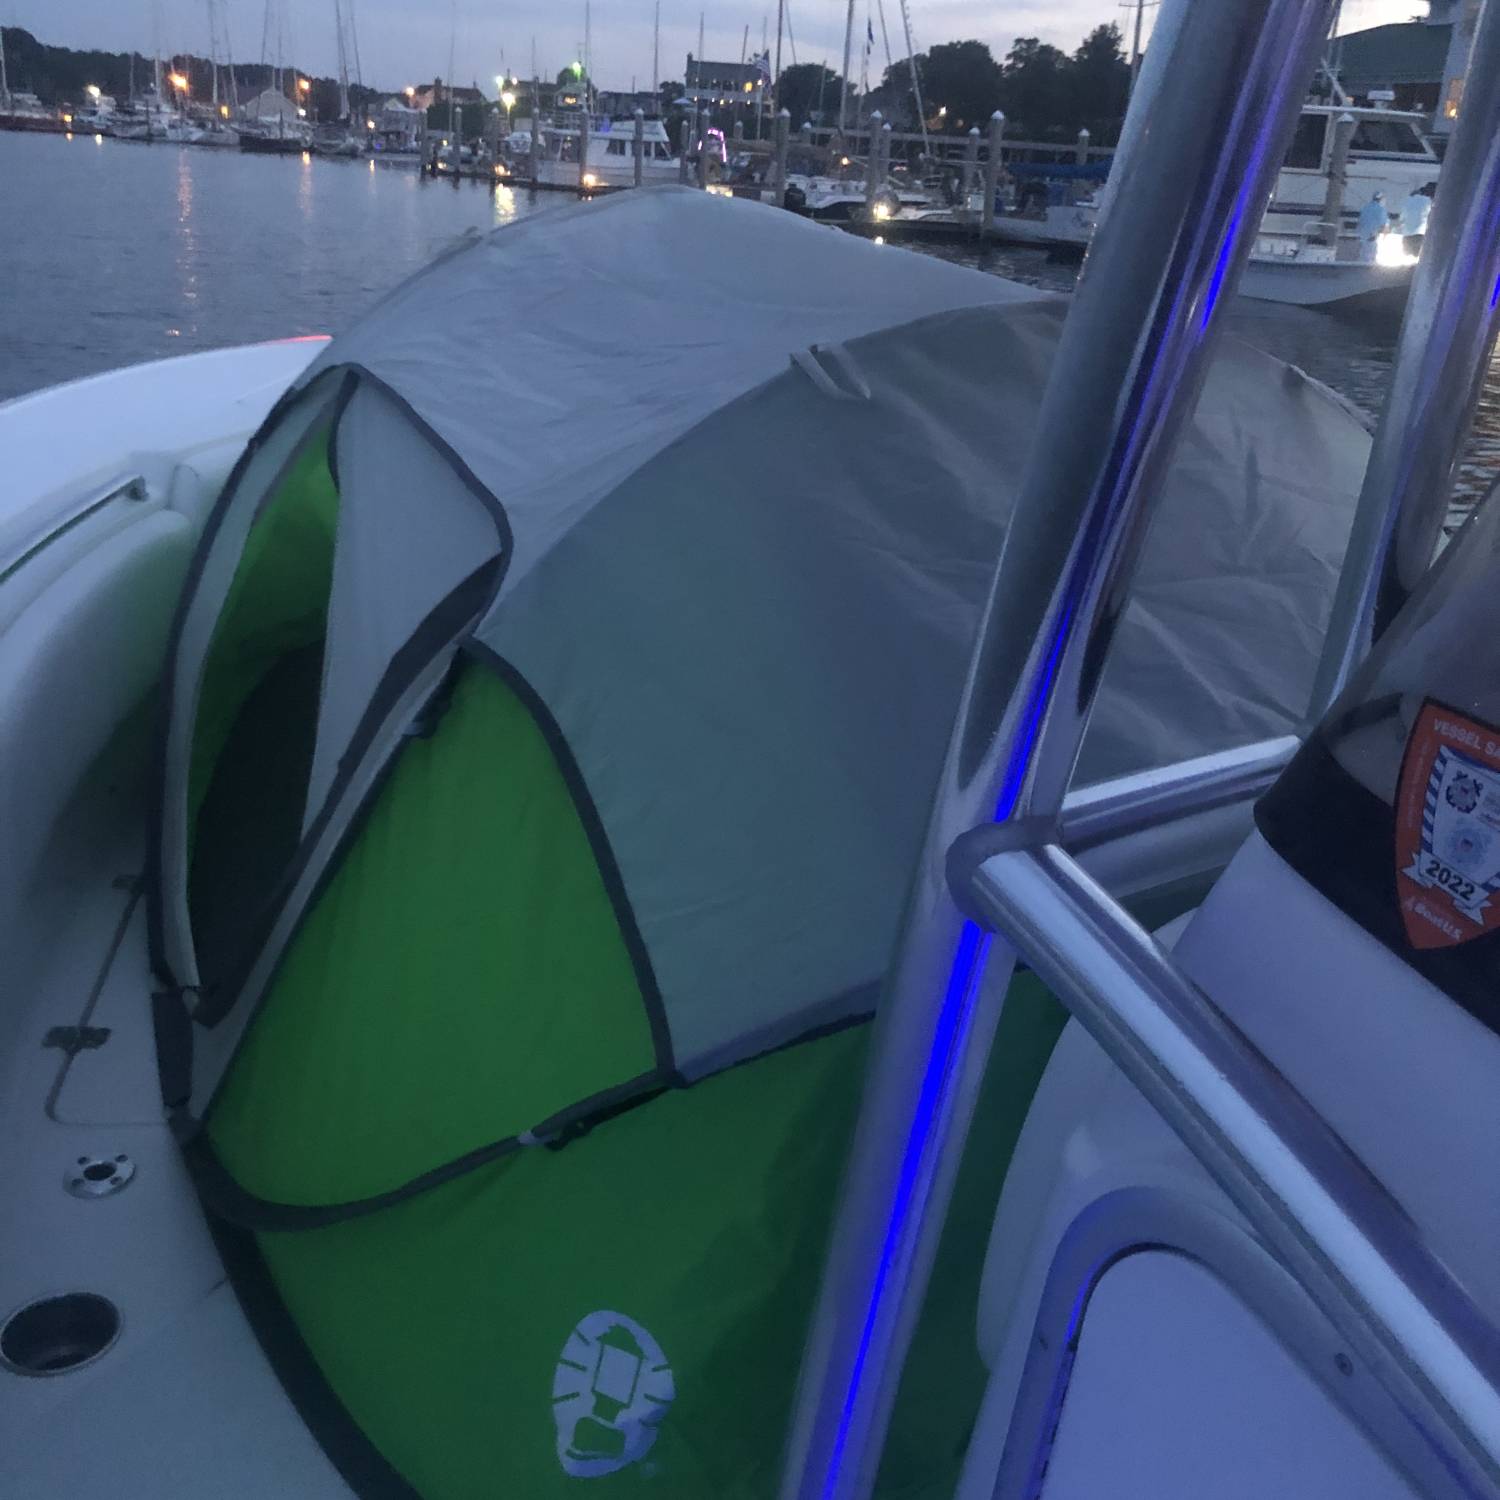 Title: Sportsman base camp - On board their Sportsman Heritage 231 Center Console - Location: Urbana va. Participating in the Photo Contest #SportsmanSeptember